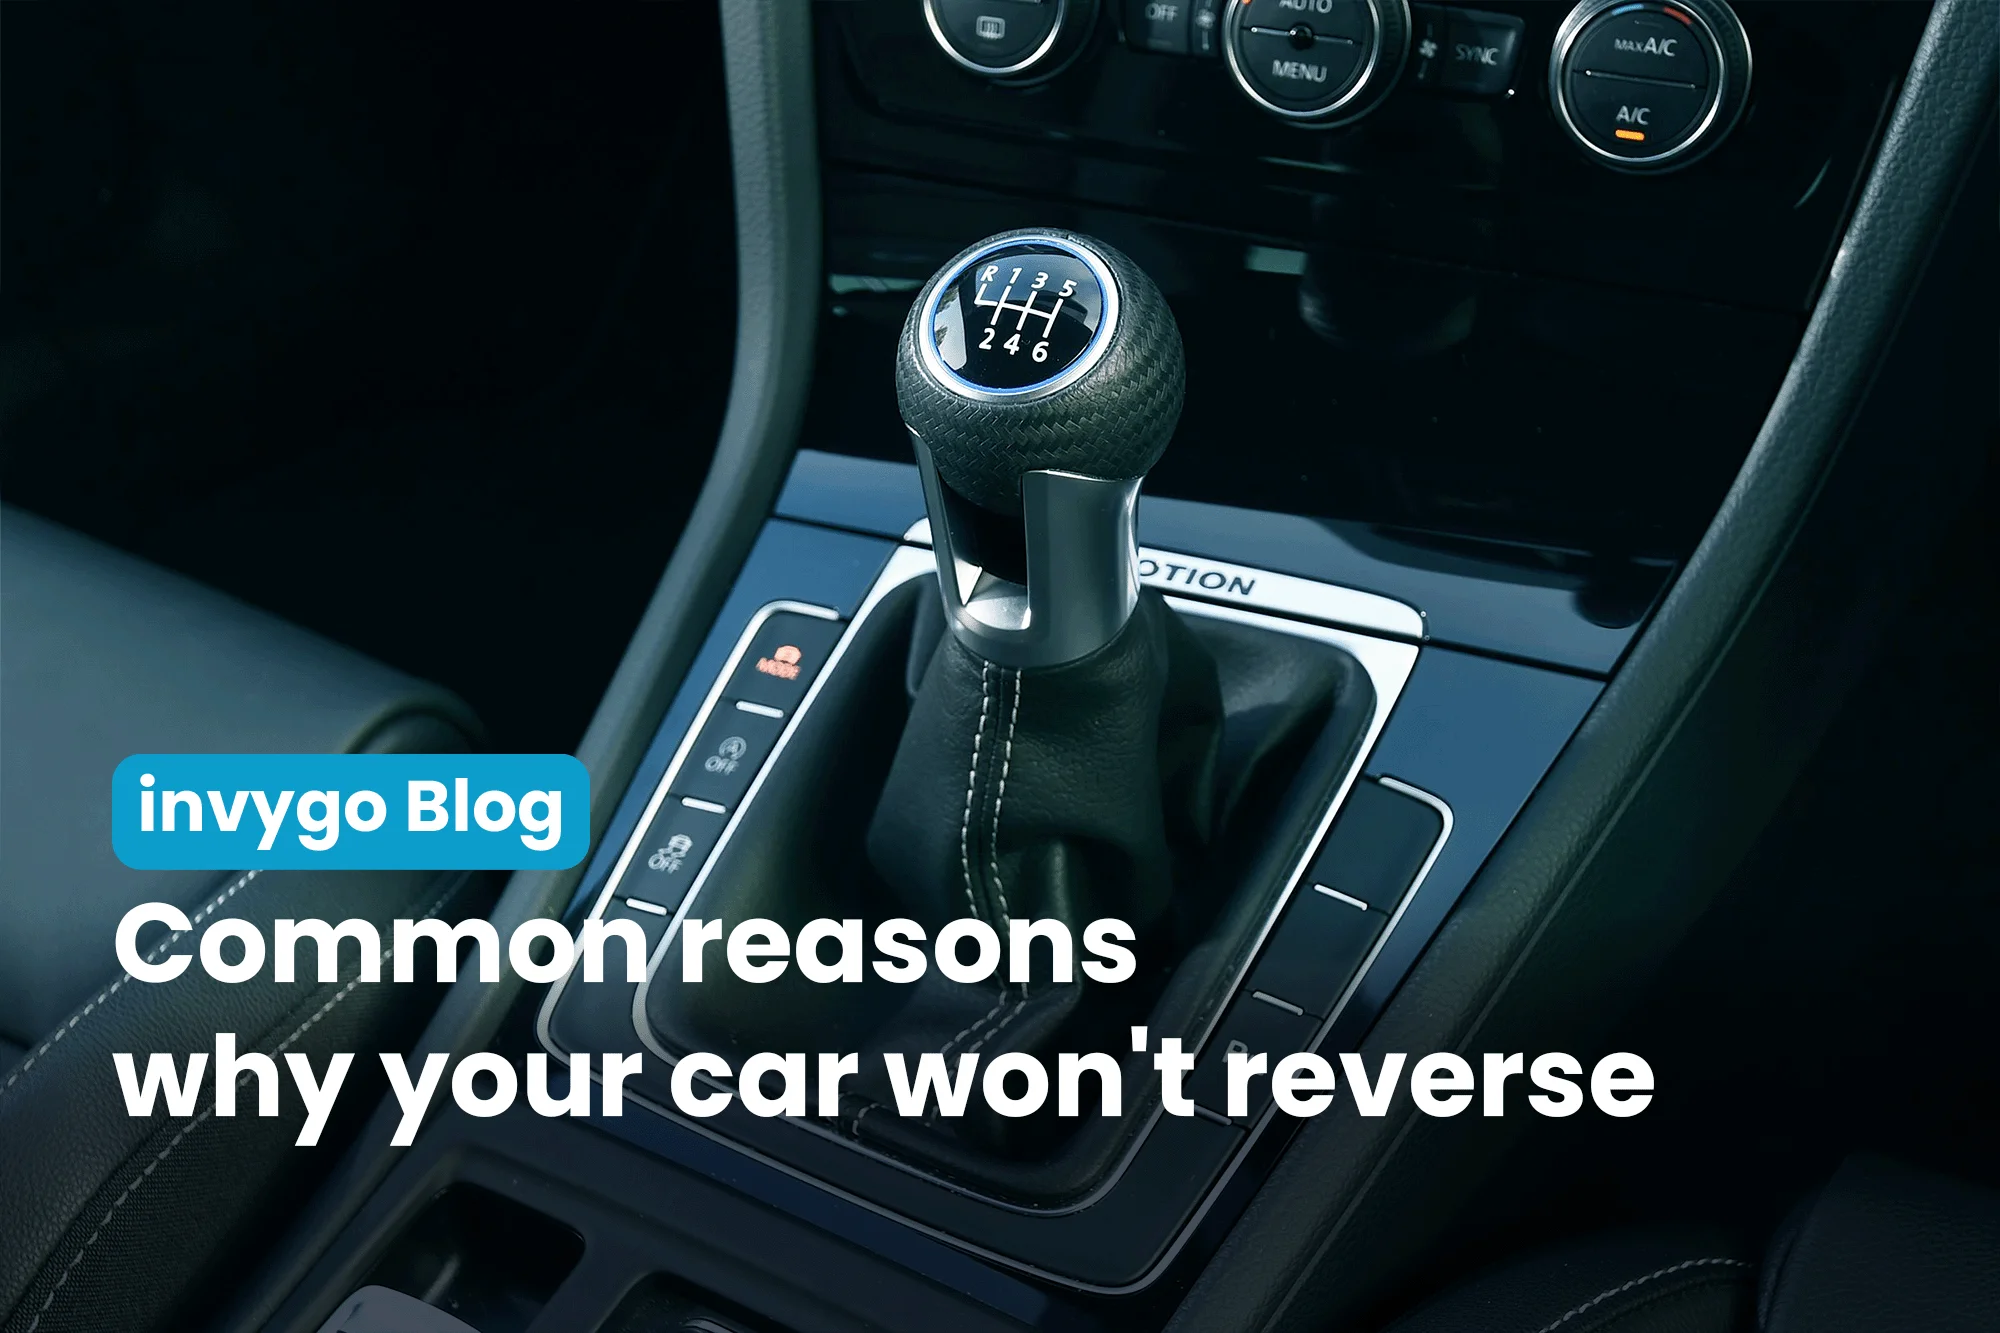 Common reasons why your car won't reverse